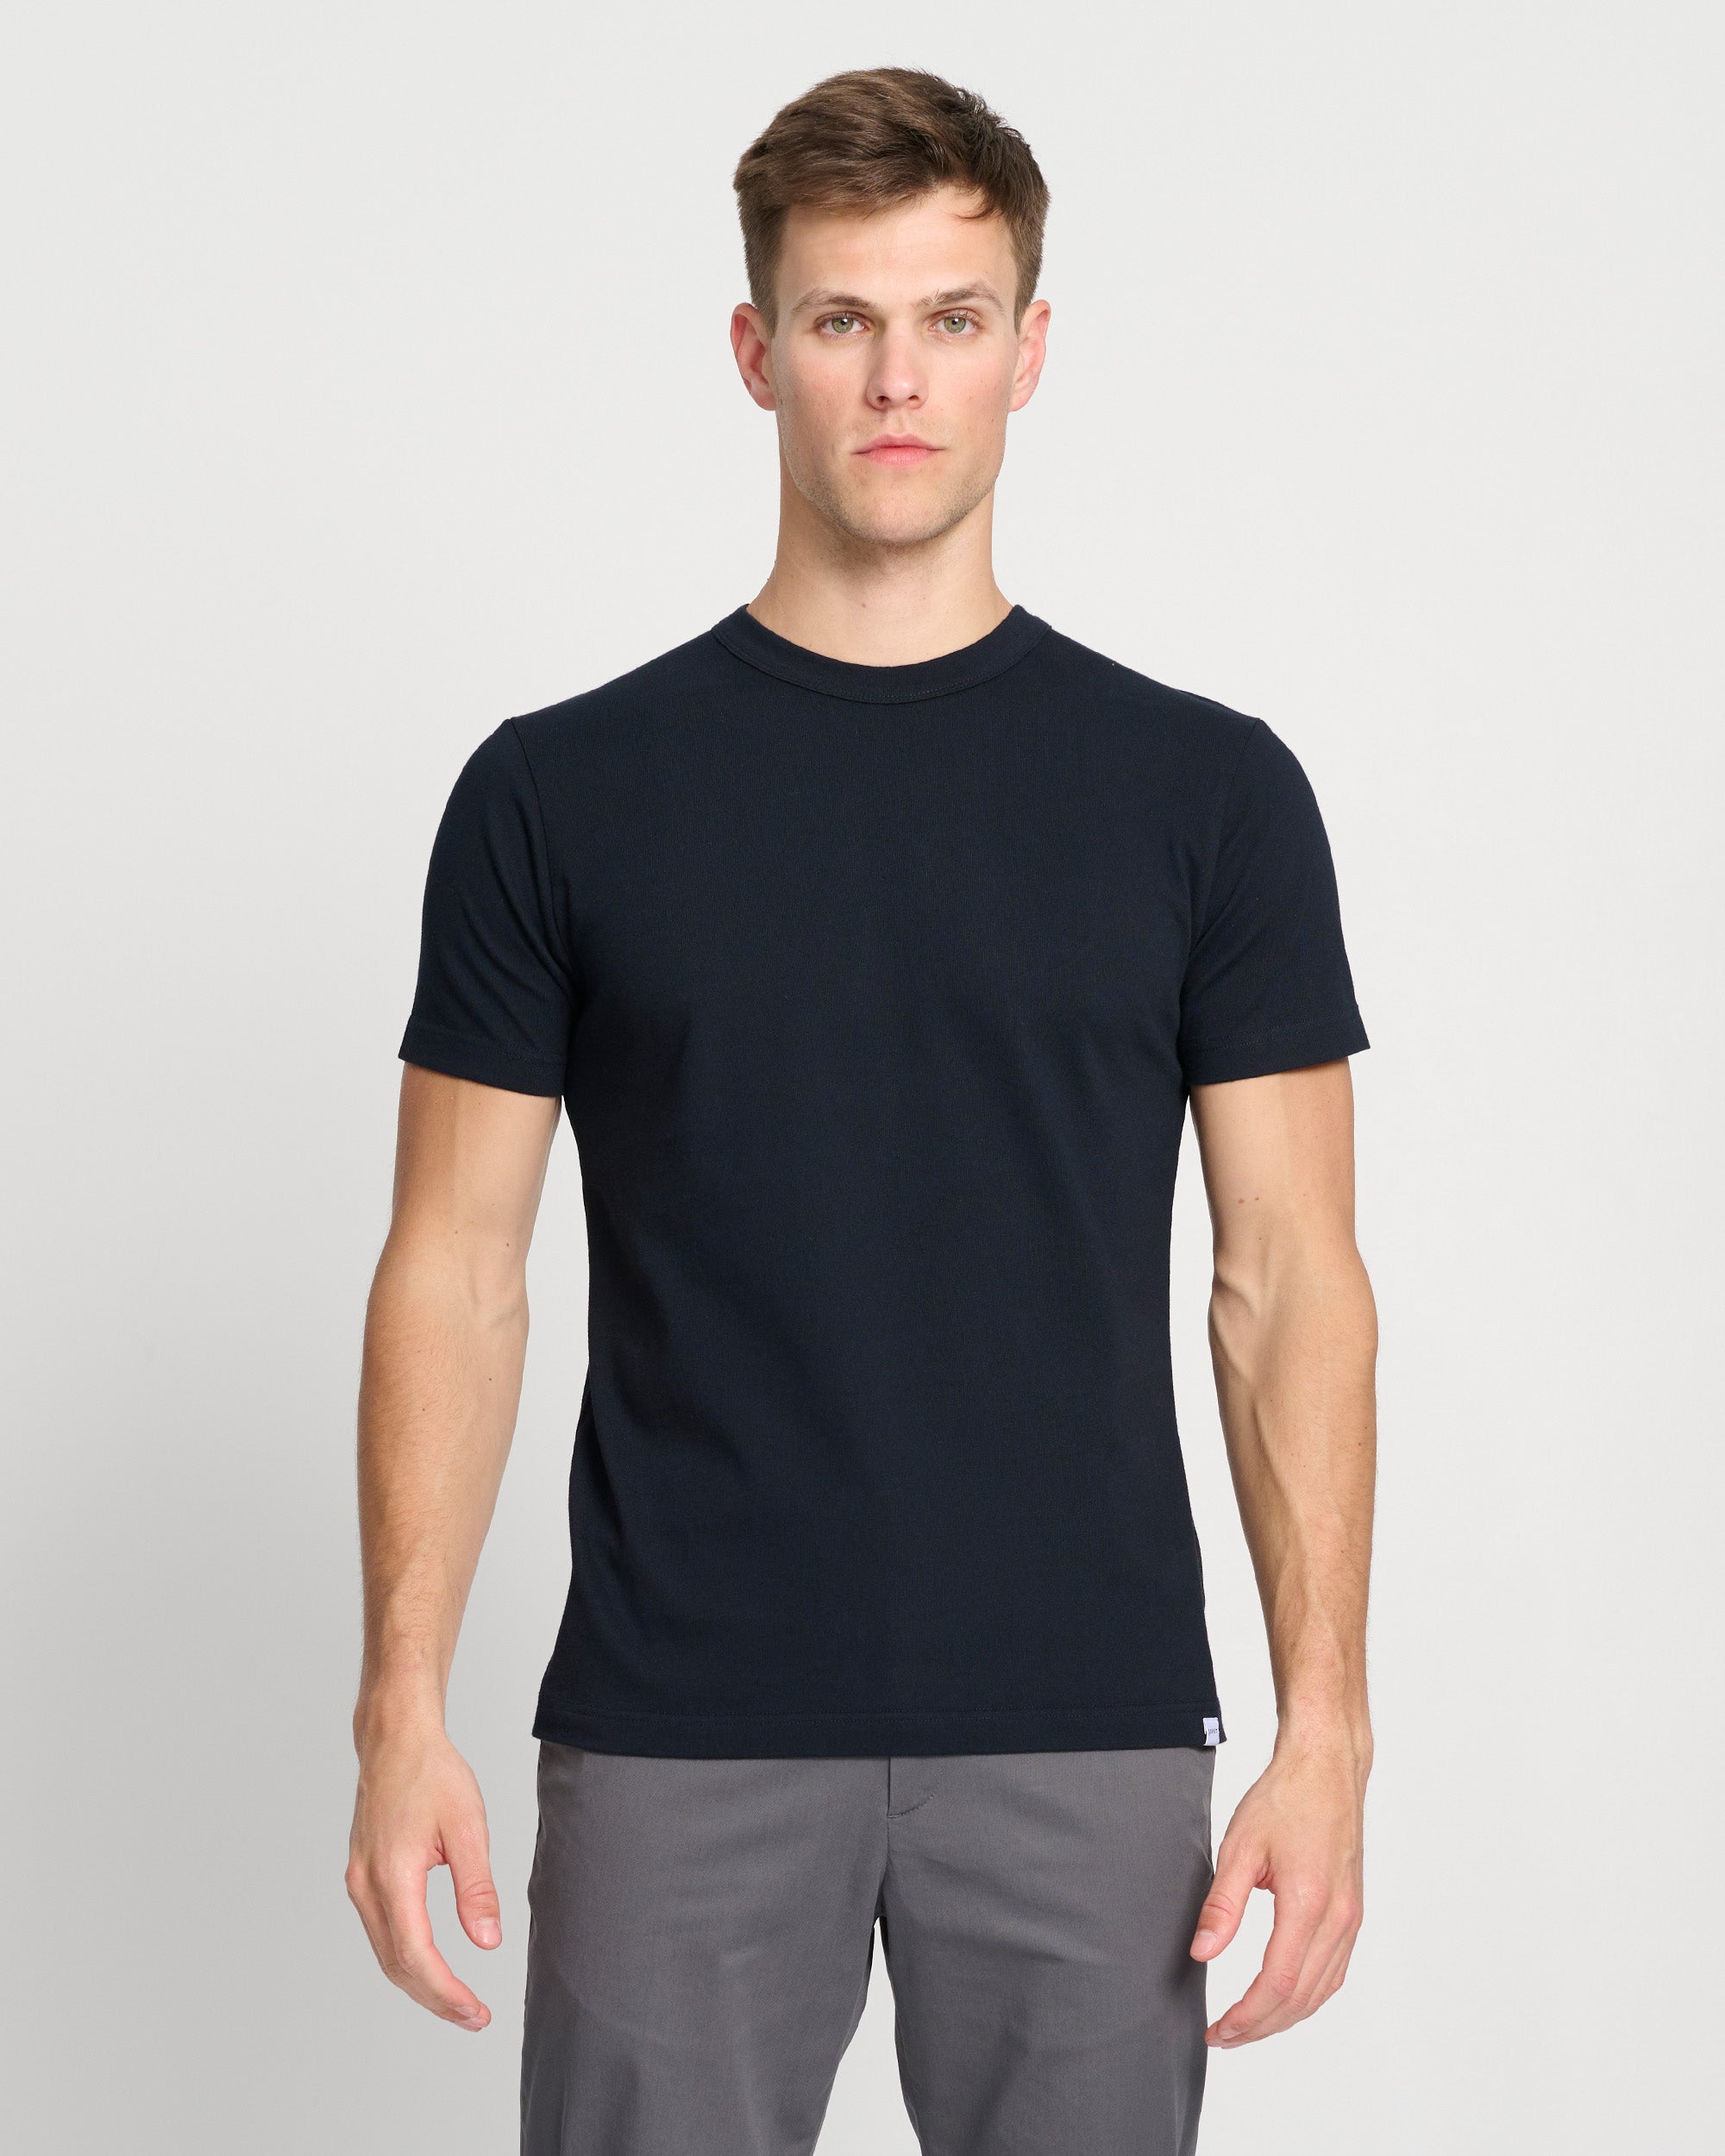 The Heavyweight T-Shirt for Men in Navy | Quality Winter Cotton Tee